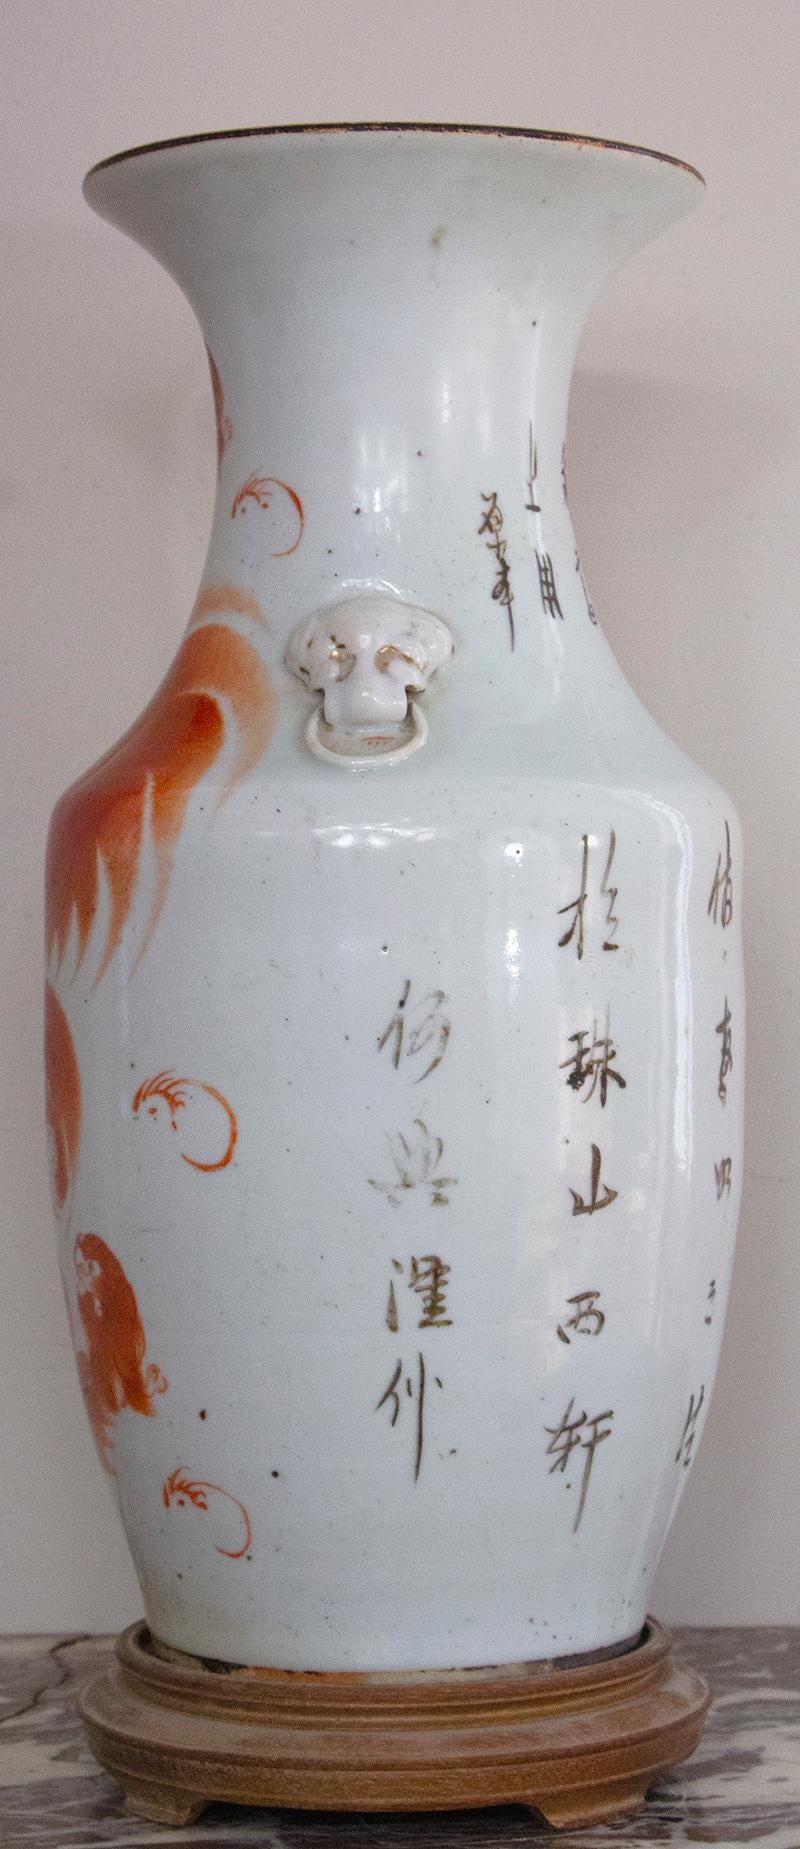 Chinese Baluster Vase in White Porcelain with Decoration of Fô Dog, Late 19th Century